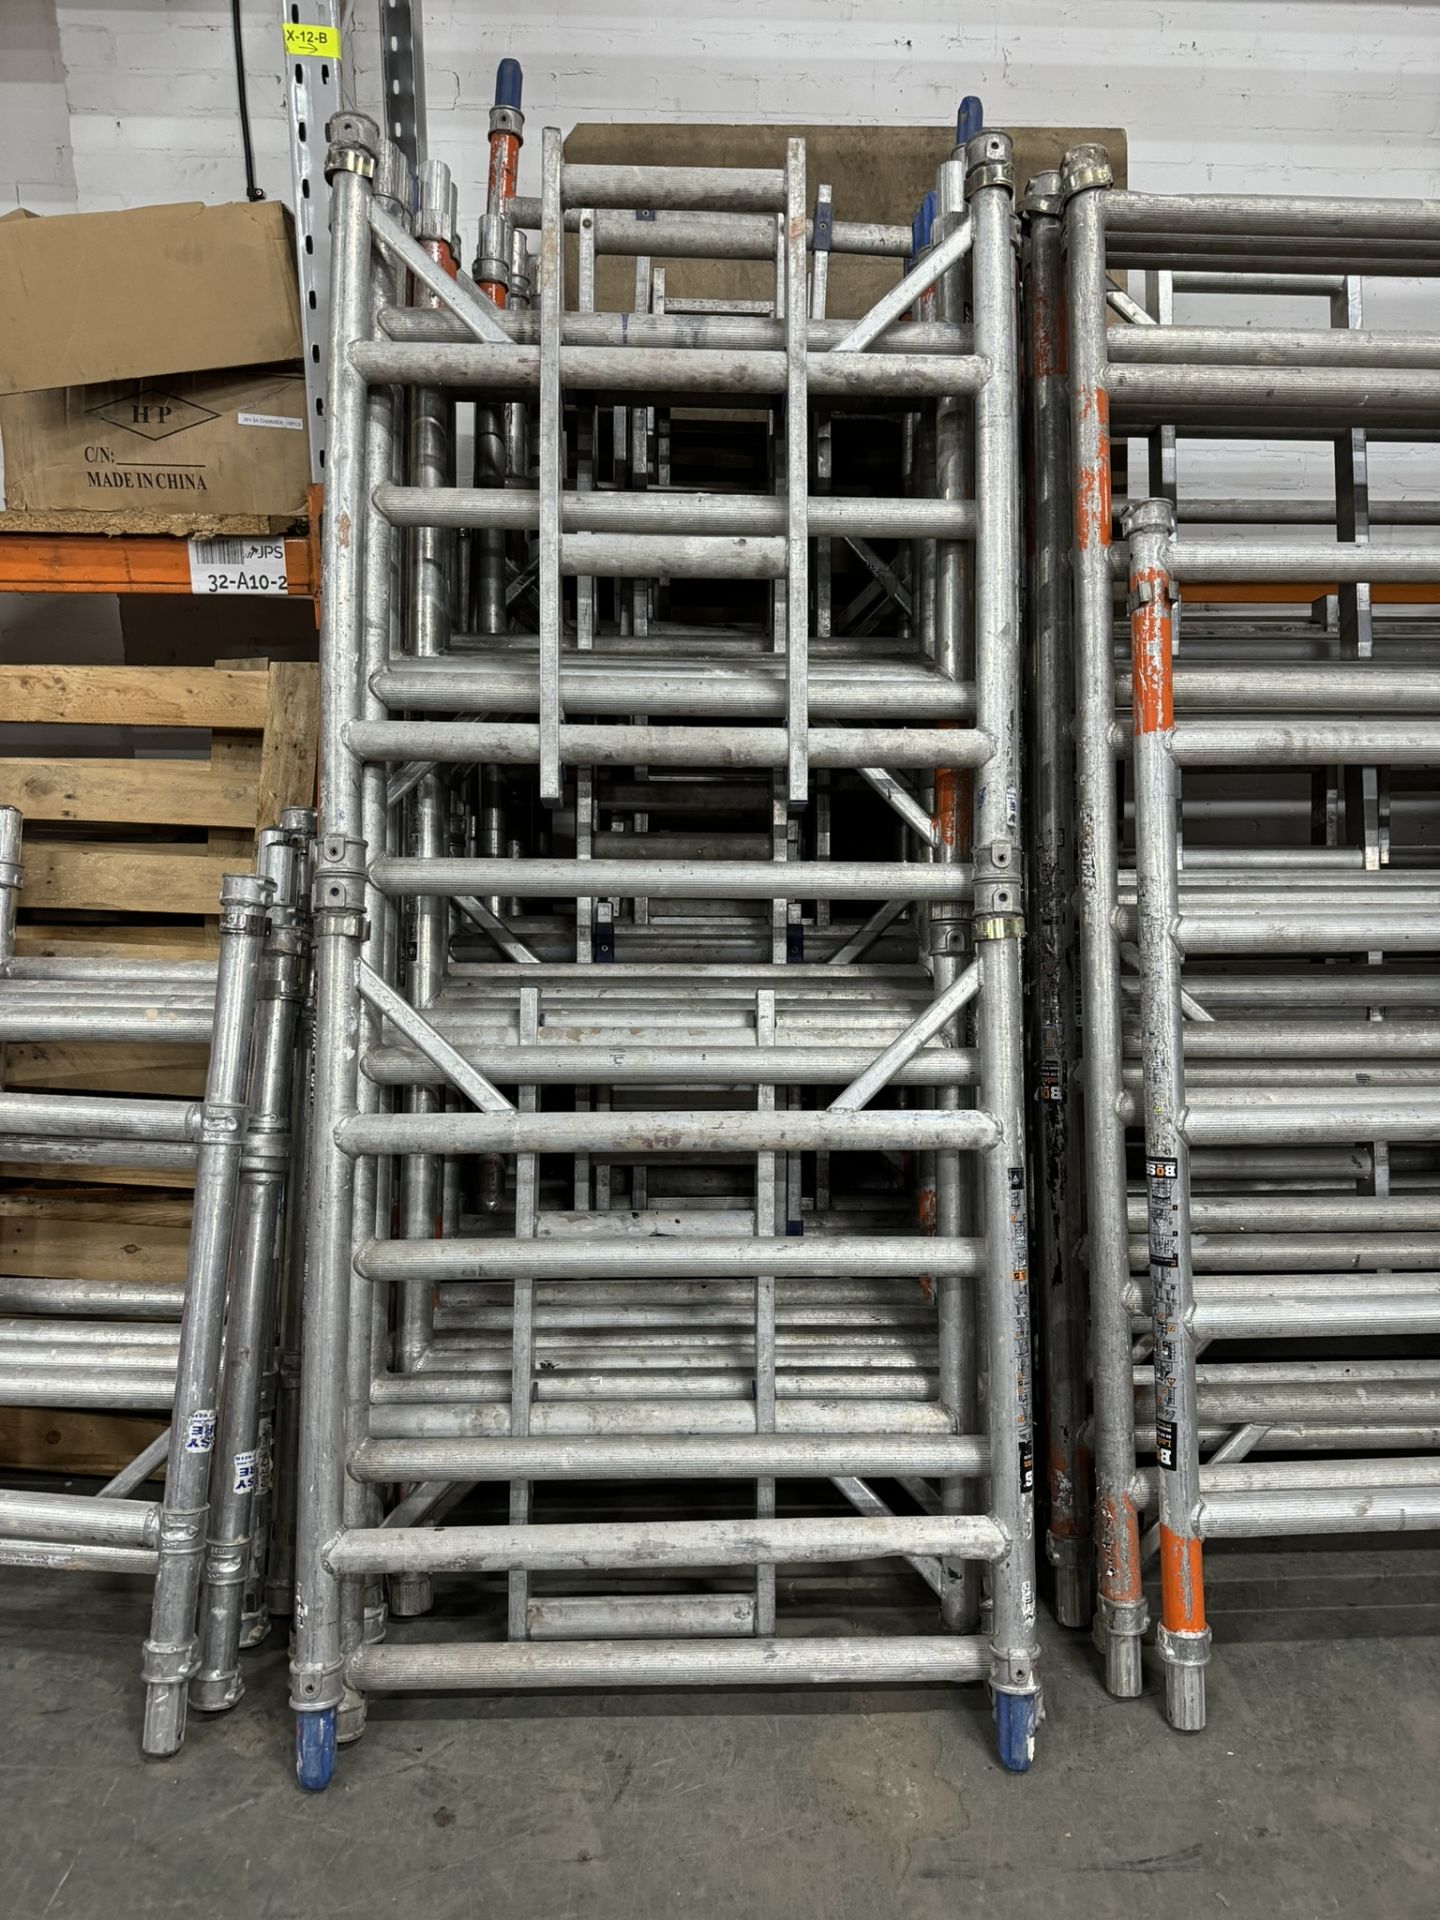 Large Quantity of Scaffolding - As per description and Photos - Image 26 of 26